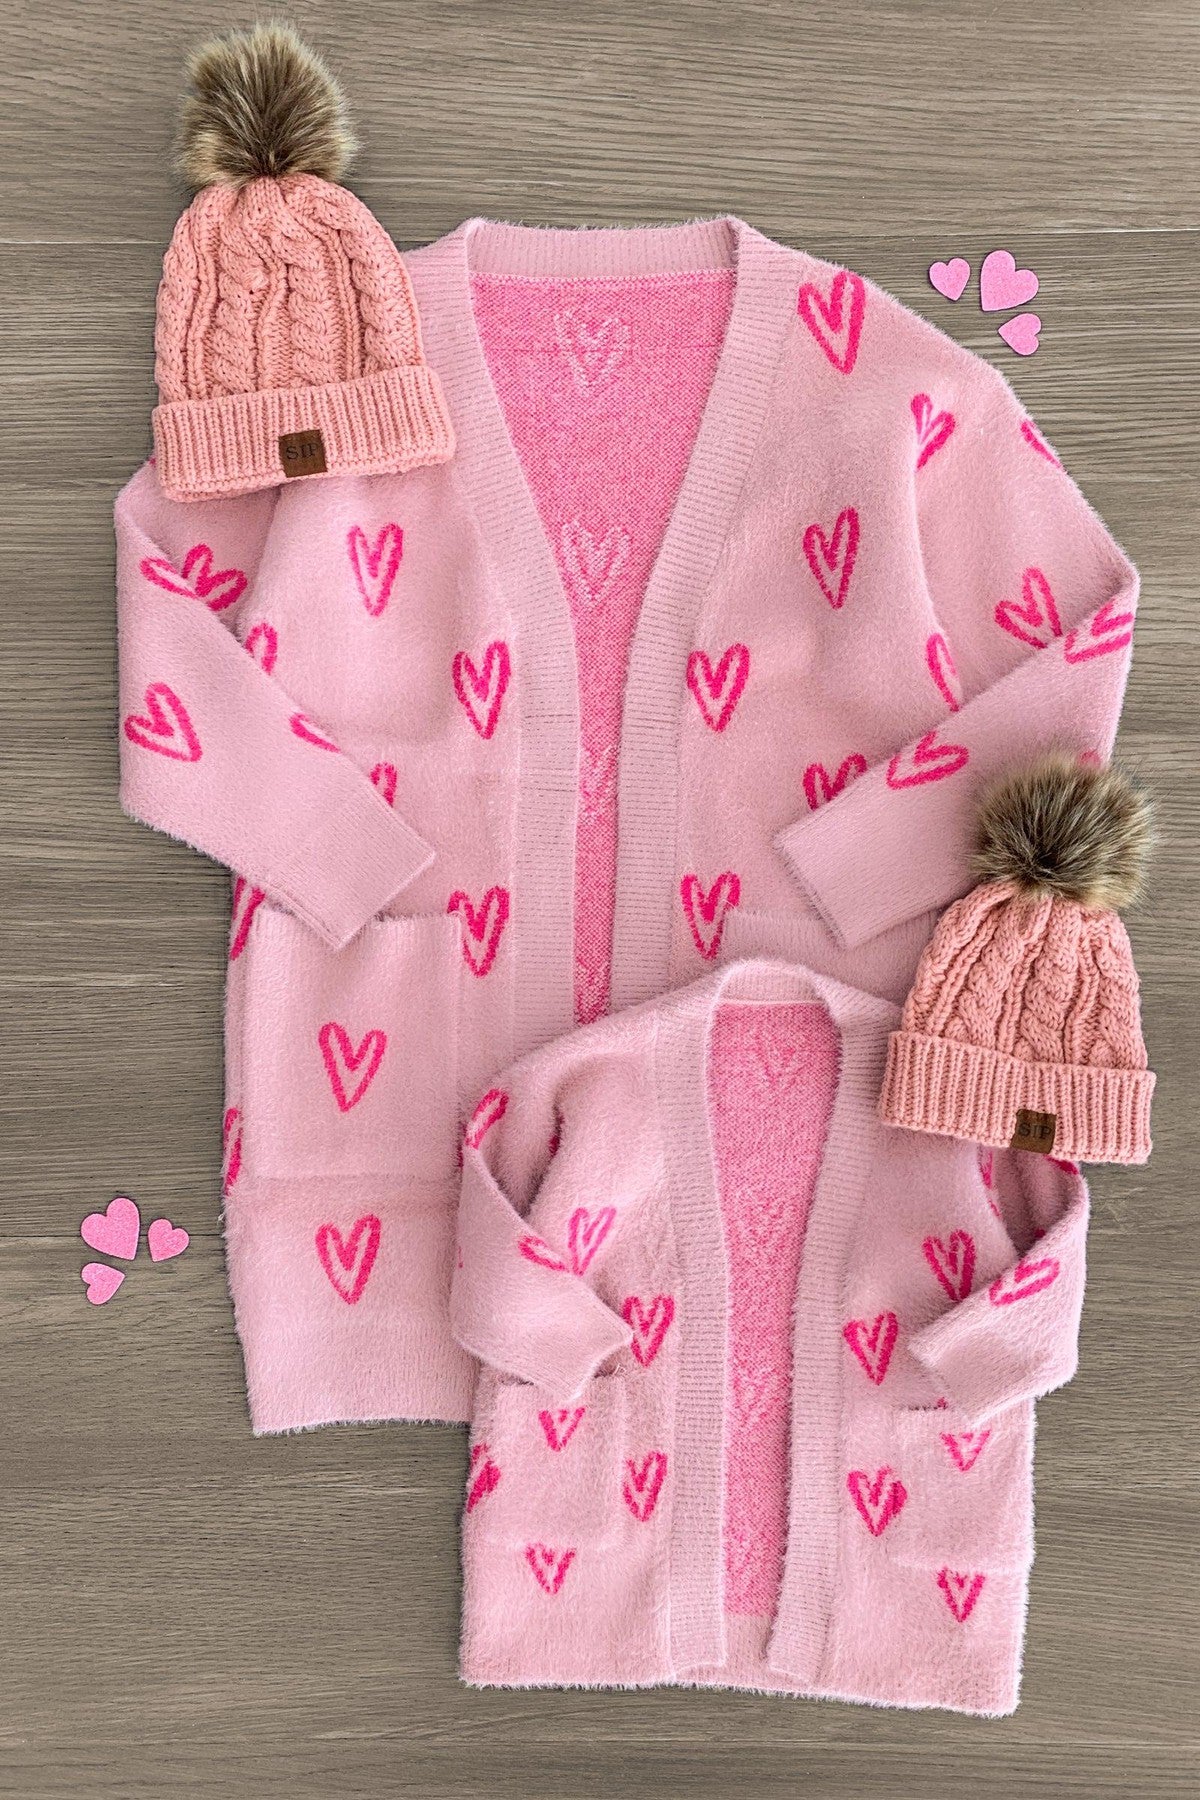 Mom & Me - Pink Heart Cardigan - Sparkle in Pink